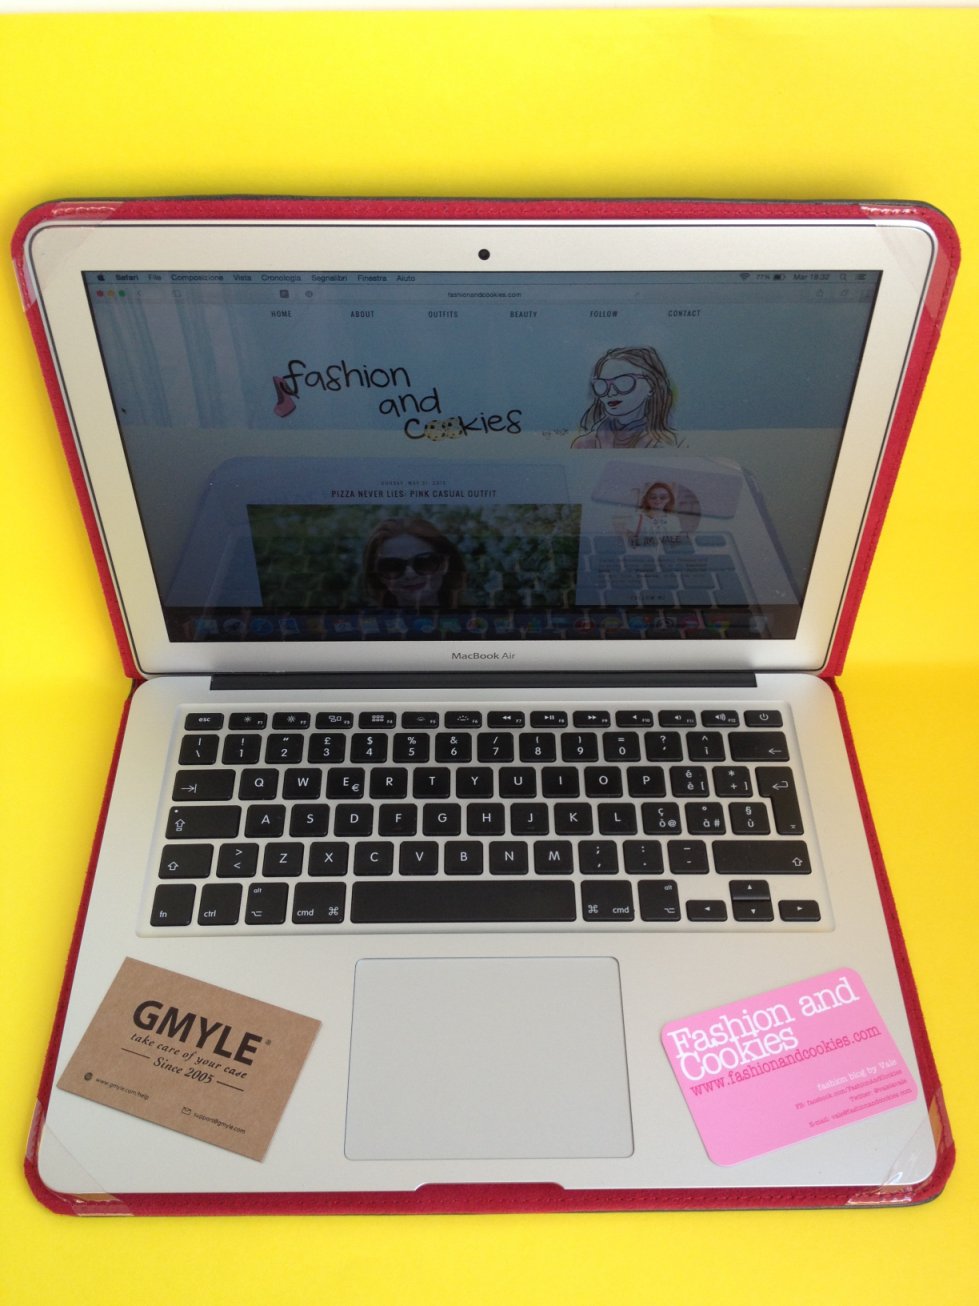 Gmyle leather folio 13 MacBook Air case review on Fashion and Cookies fashion blog